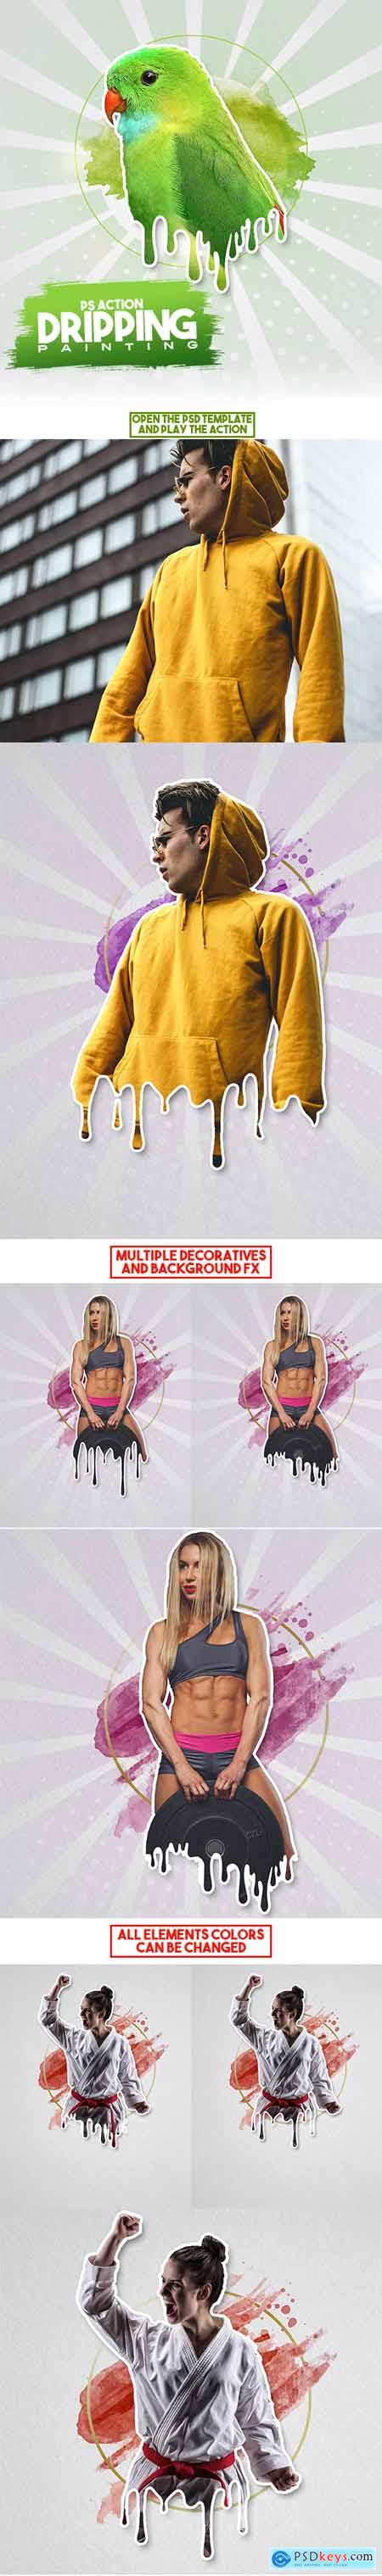 Dripping Painting Photoshop Action 26711684